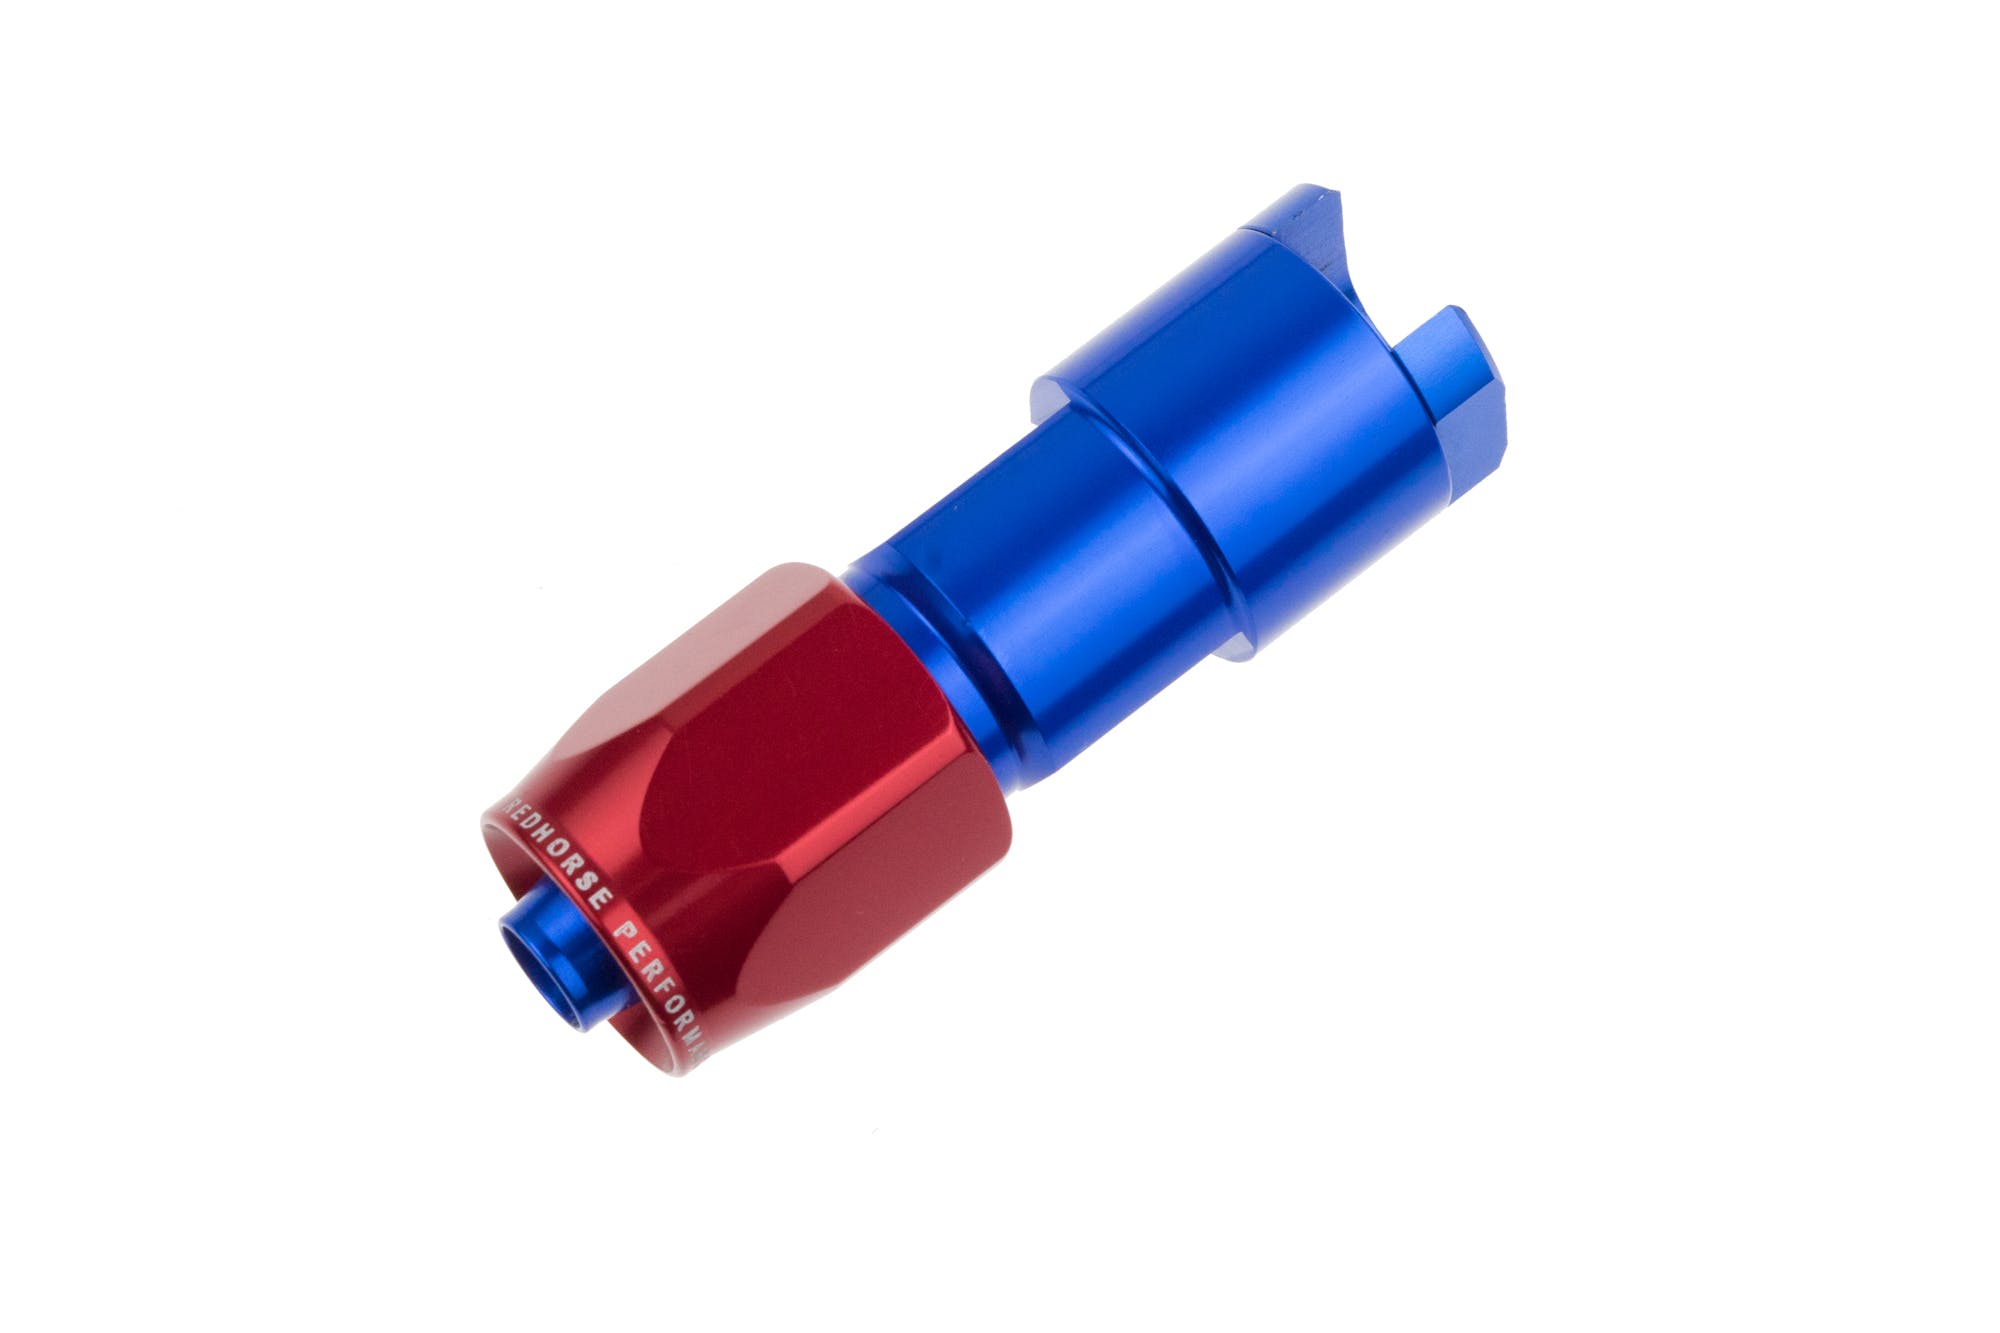 Redhorse Performance 8000-06-06-1 -06 to 3/8in SAE quick disconnect Female straight - Red/blue.